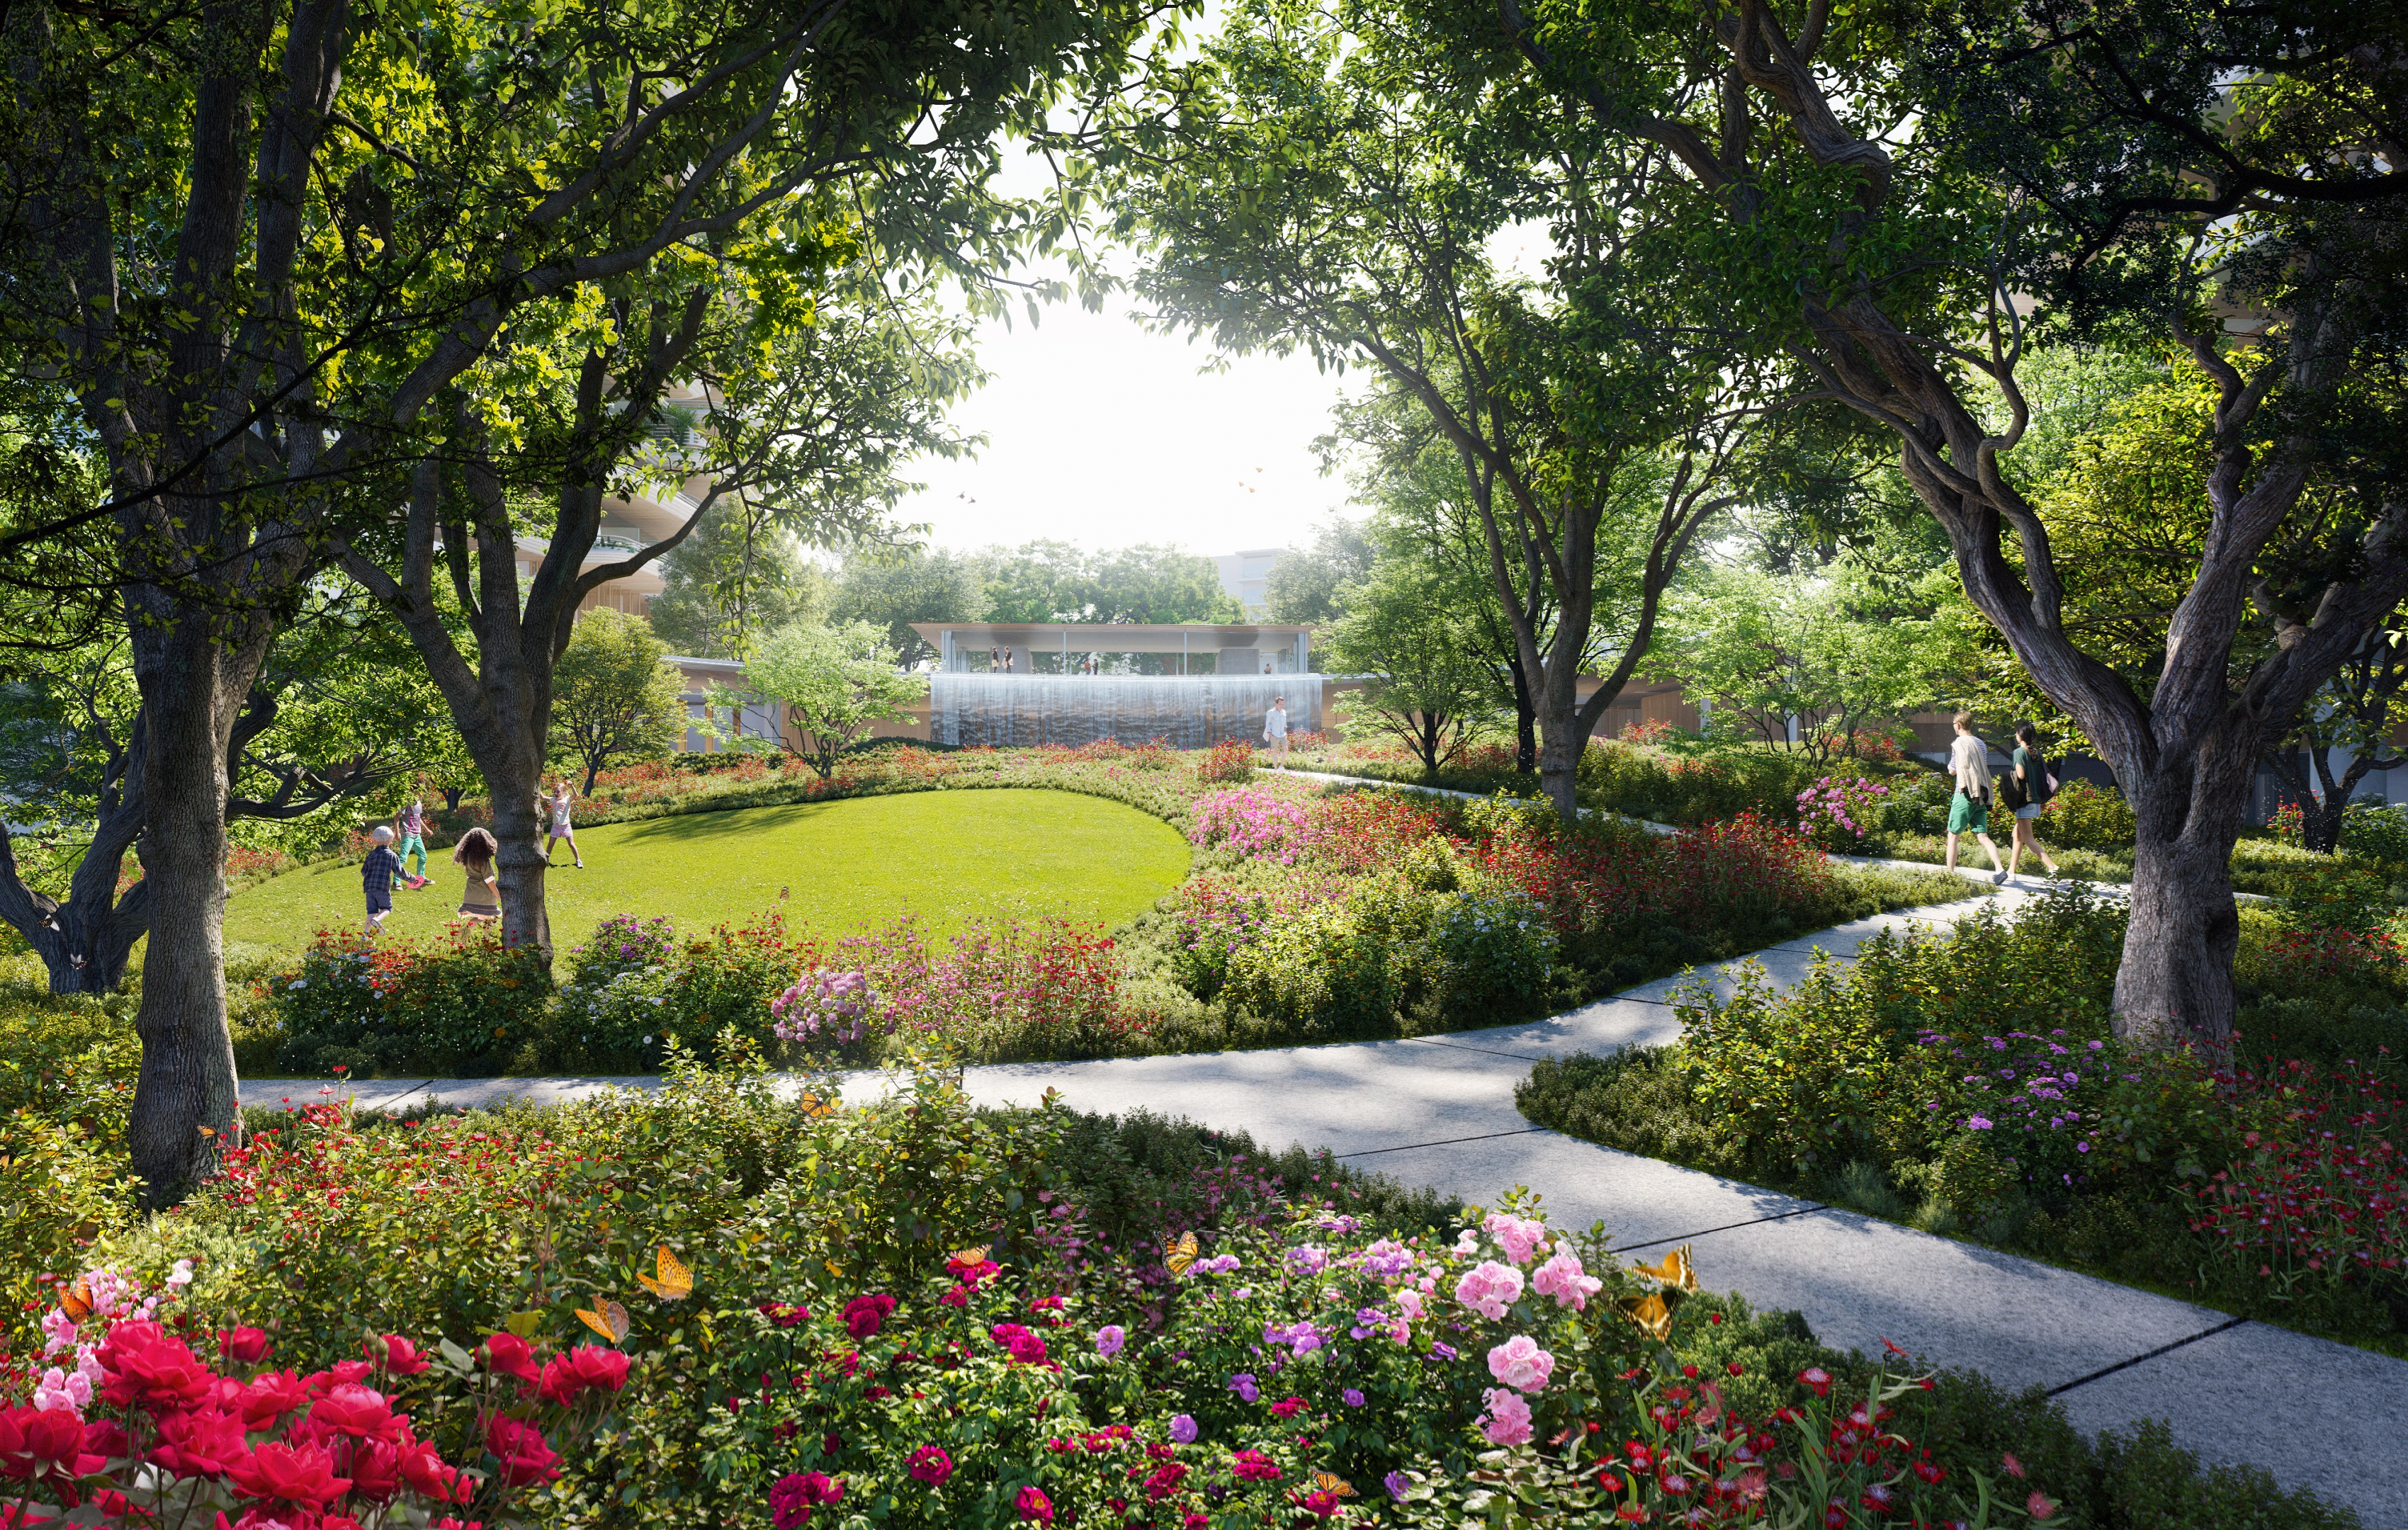 Architectural visualization of Beverly Hills for Foster & Partners. A garden area with lots of trees and flowers in sunny day light.